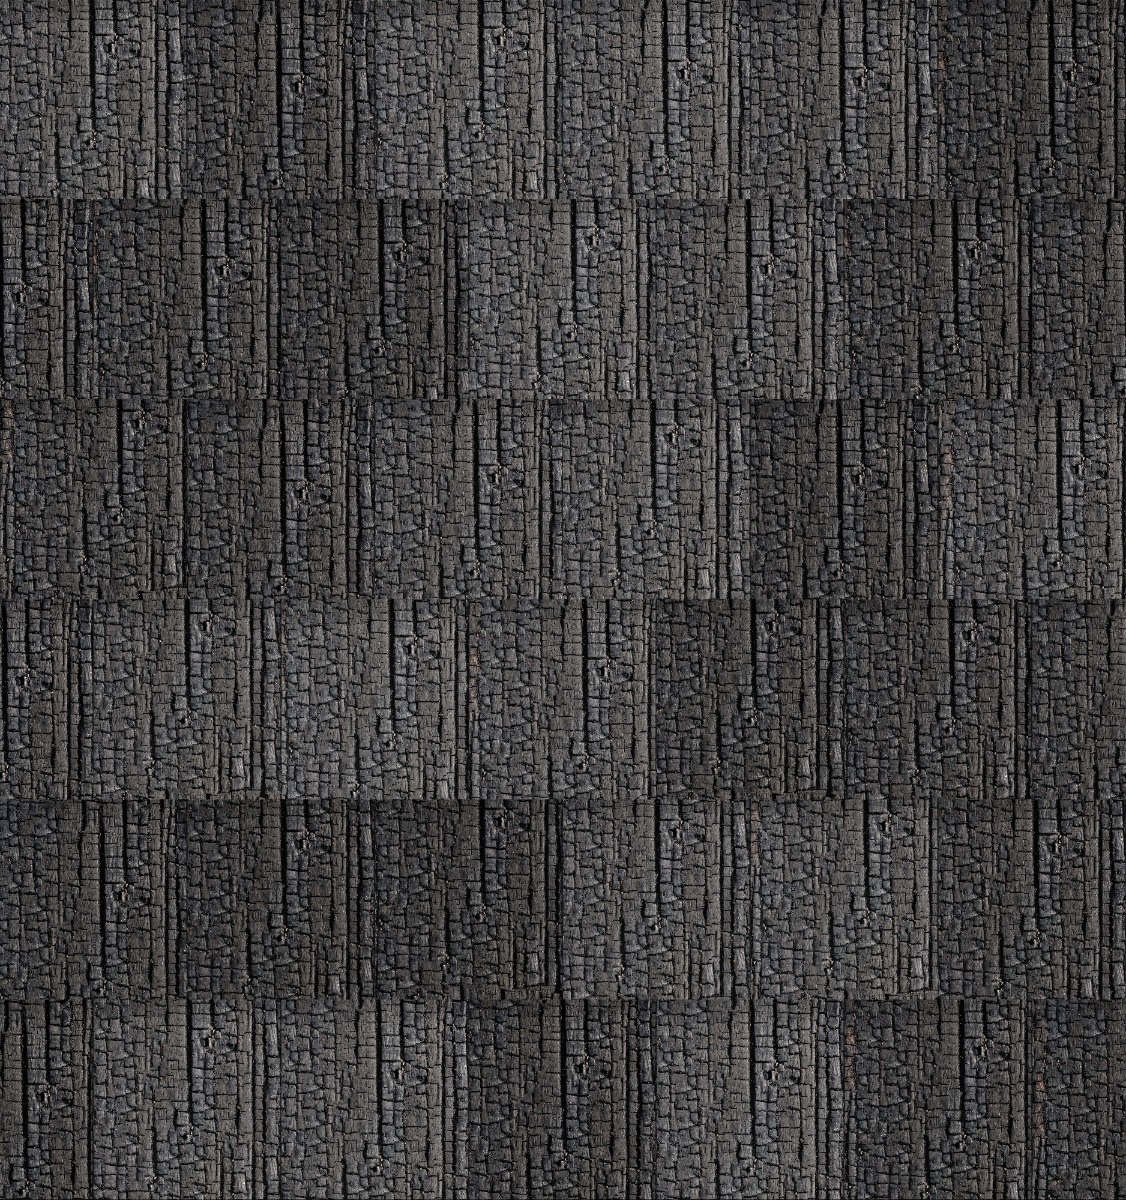 A seamless wood texture with charred timber boards arranged in a Stretcher pattern